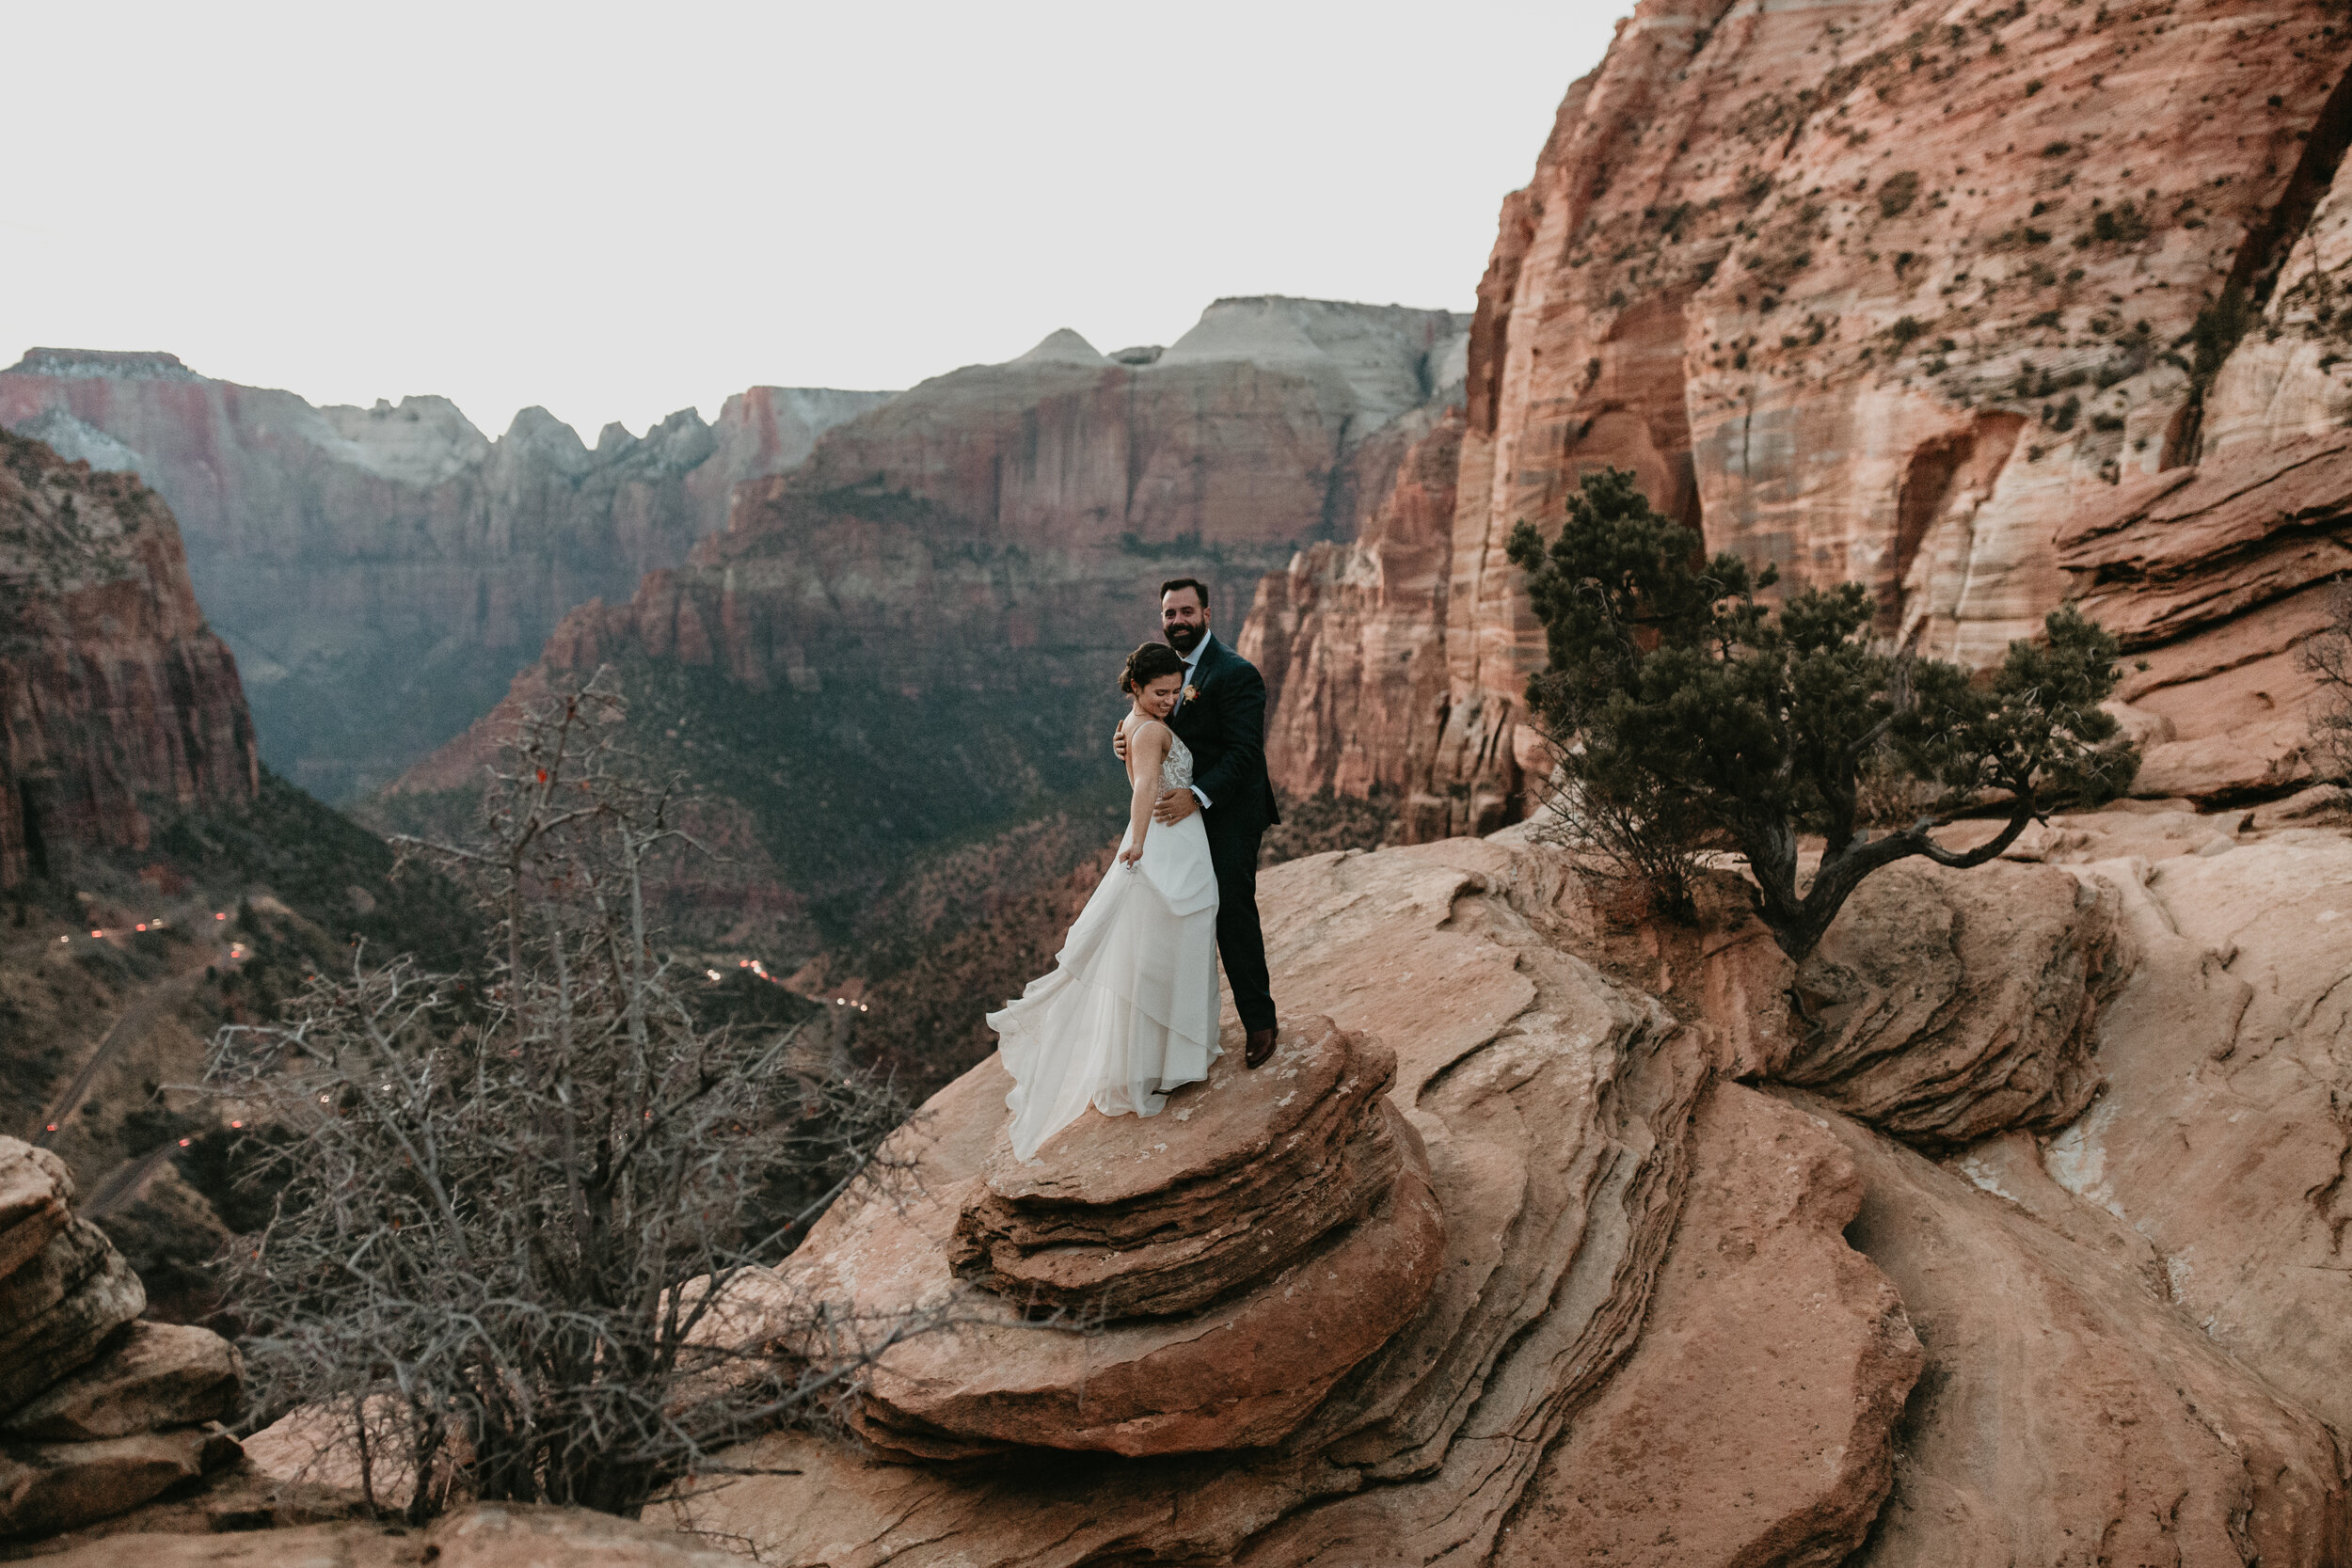 Nicole-Daacke-Photography-snowy-hiking-elopement-in-zion-national-park-zion-elopement-photographer-canyon-overlook-trial-brial-portraits-in-mt-zion-national-park-utah-desert-adventure-elopement-photographer-180.jpg